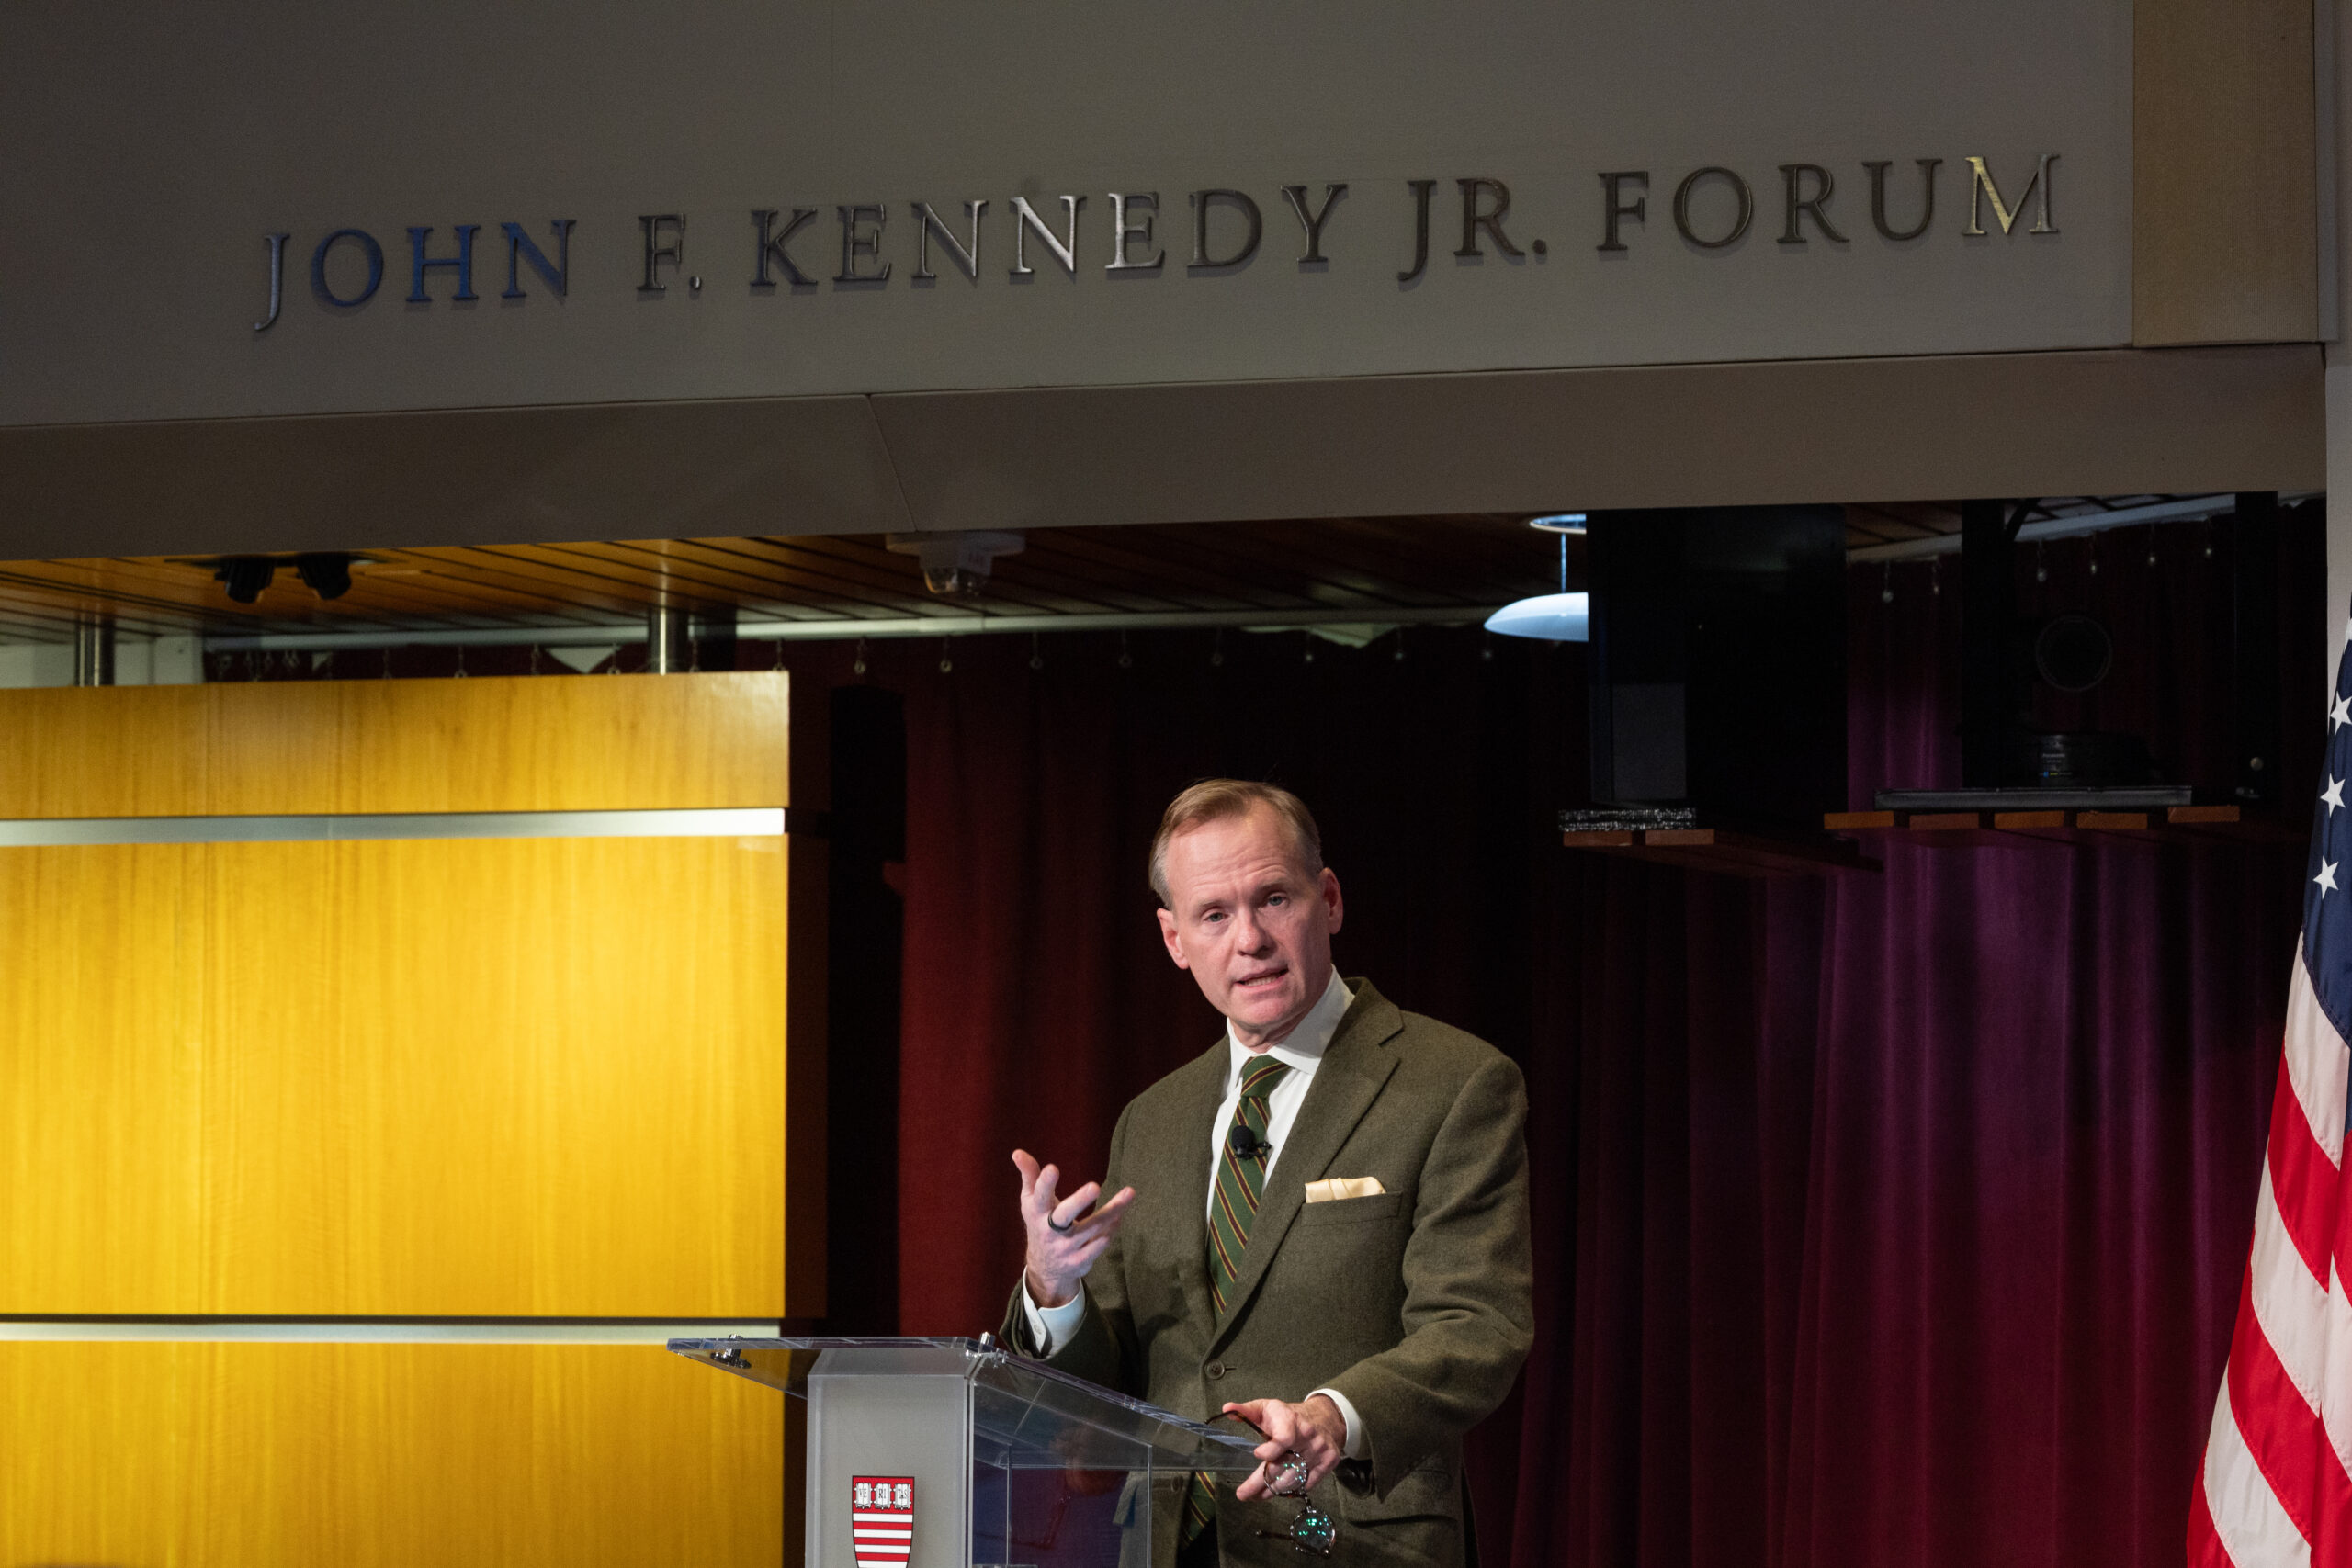 John Dickerson, a light skinned man with light reddish colored hair, speaks at a podium below a sign that say s"John F. Kennedy Jr. Forum" wearing a green jacket, white shirt, and tie.